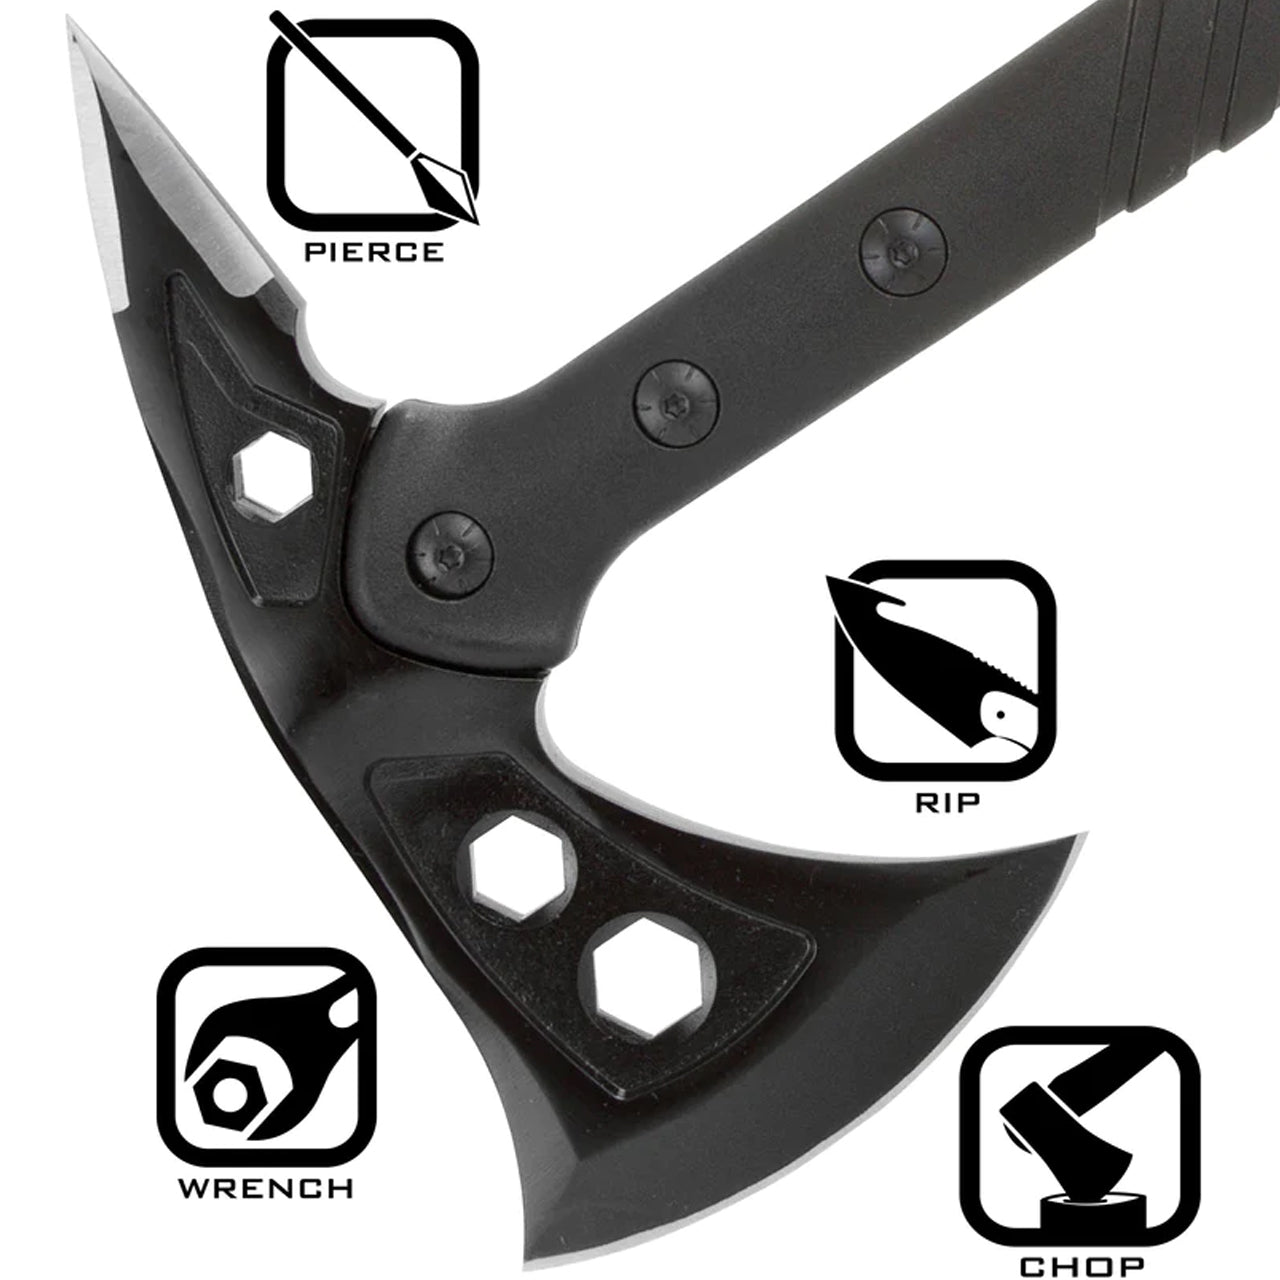 With a REAPR 11000 TAC Hawk Axe tactical survival axe in your outdoor survival kit, you’ll be prepared for anything. Designed for breaching, this versatile axe is perfect for camping, hunting and survival. www.defenceqstore.com.au